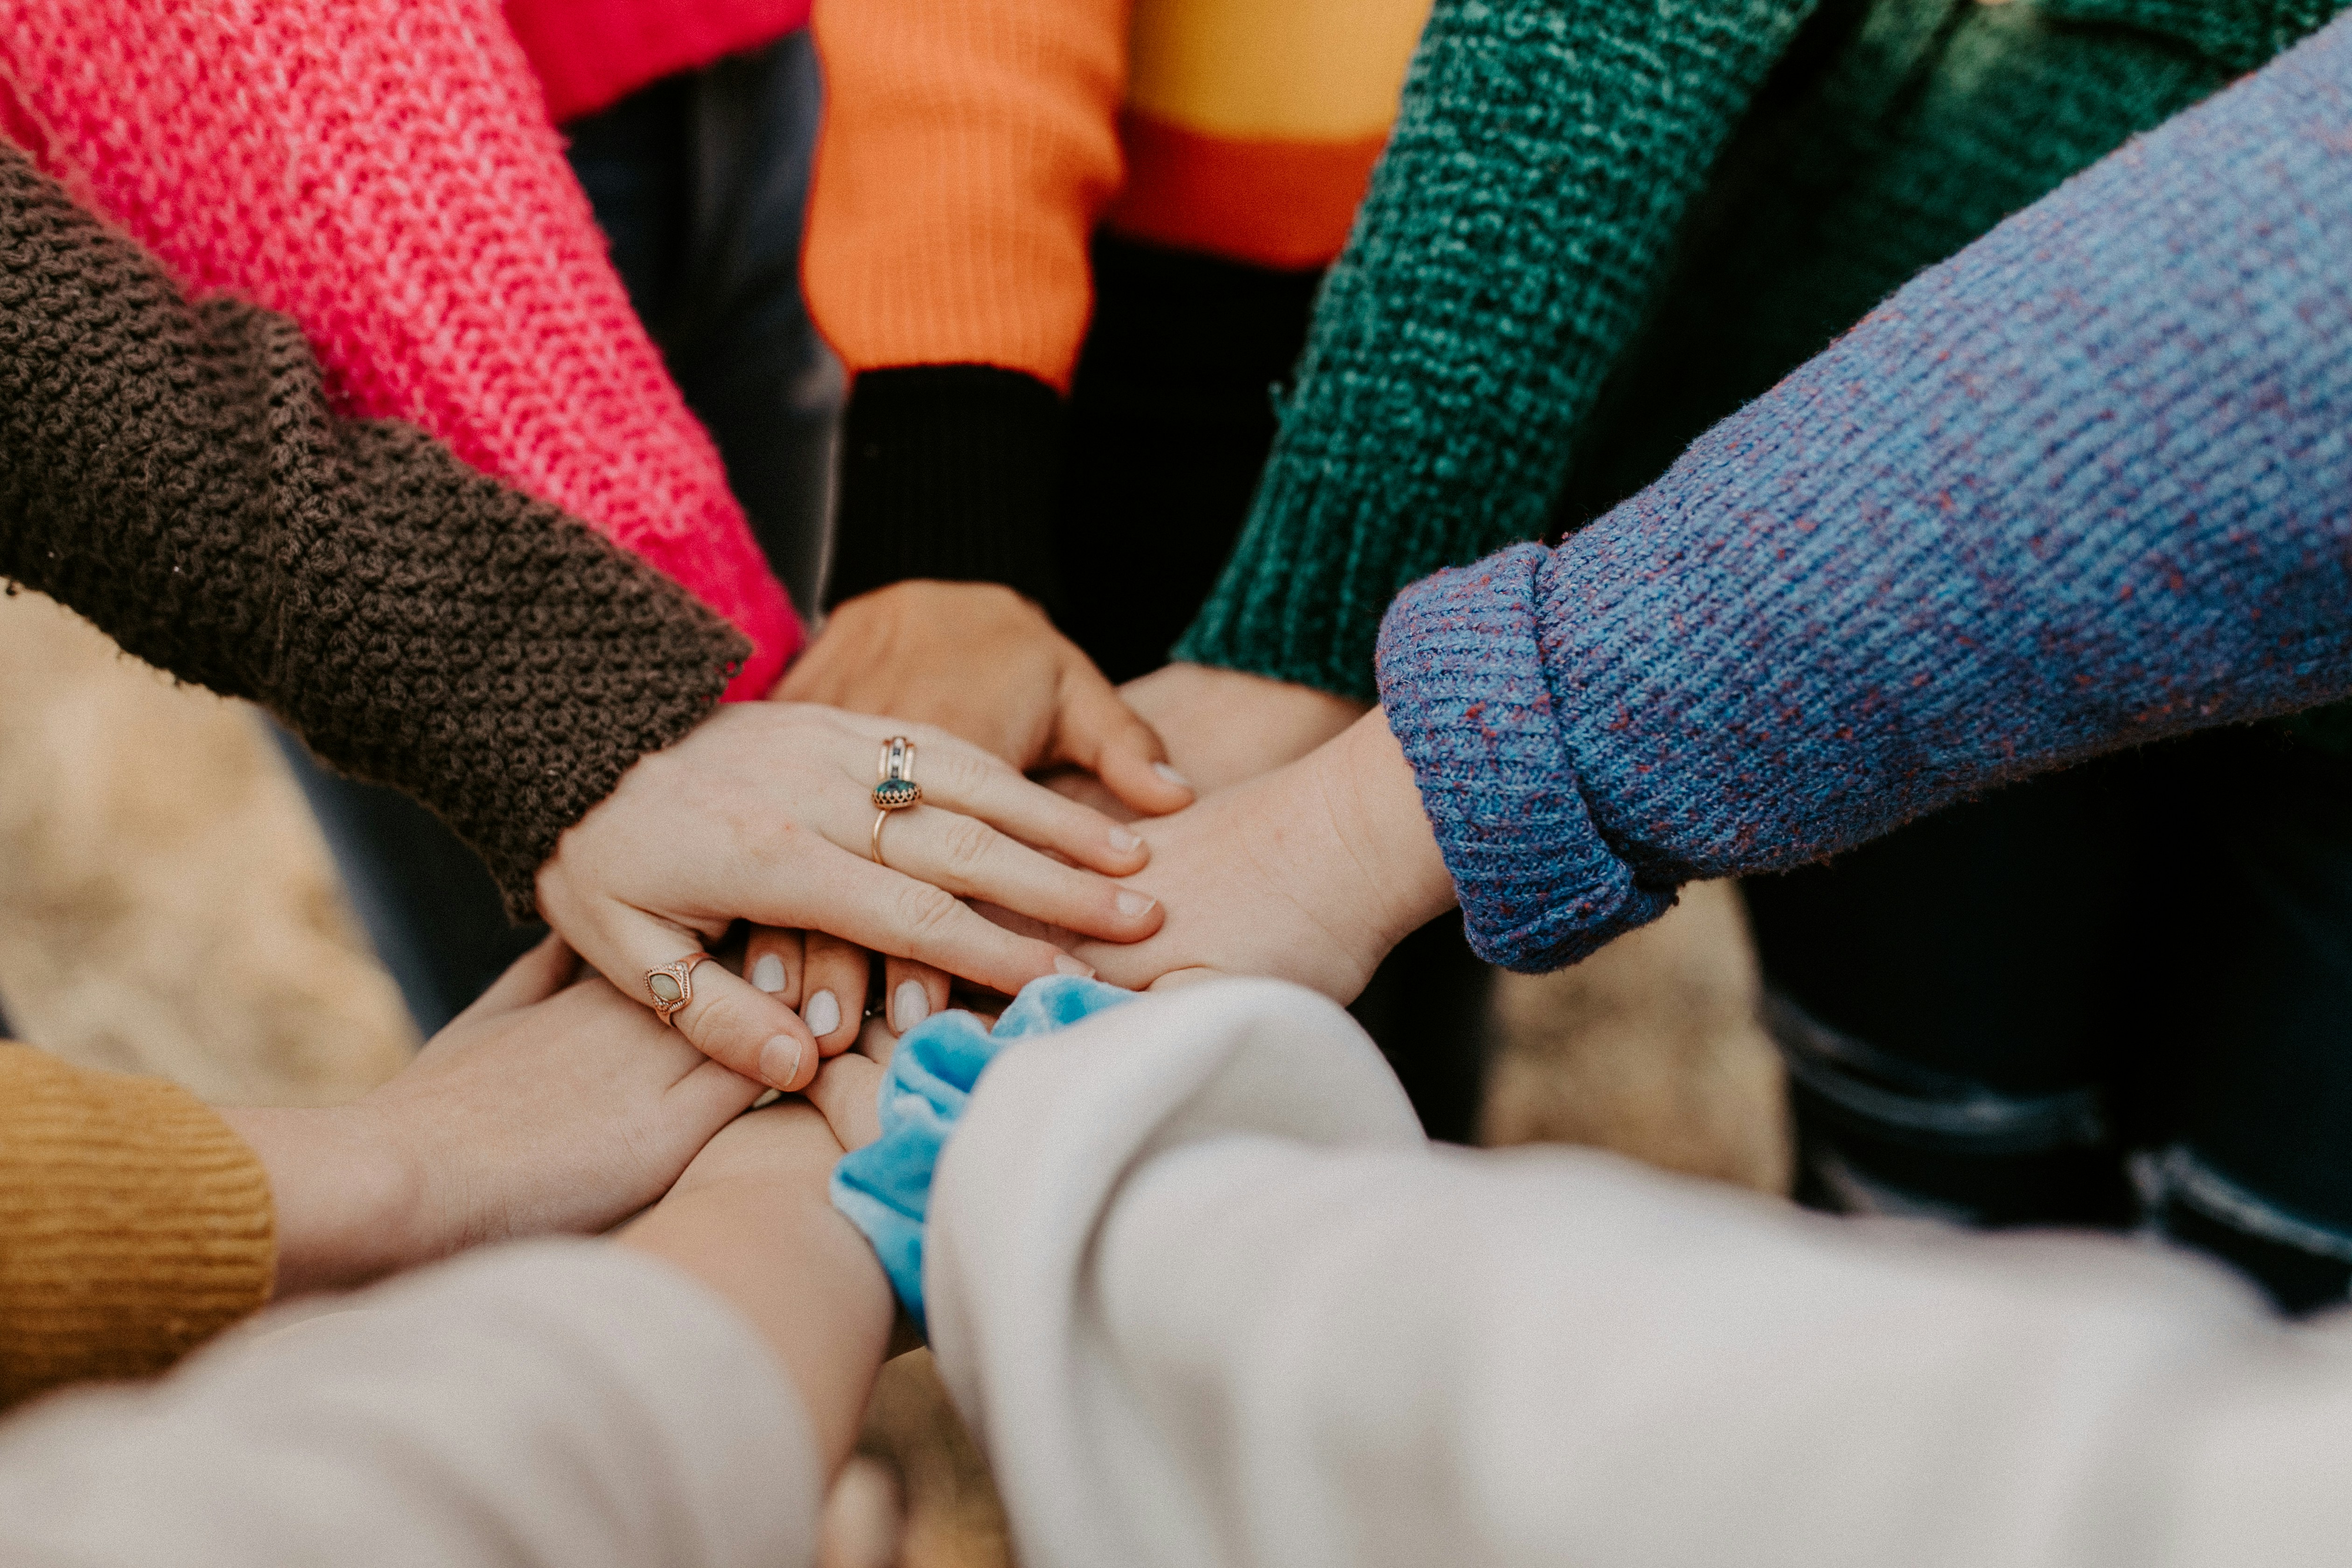 Connection, Belonging, Identity: Why Branding Matters When You’re Building Your Community